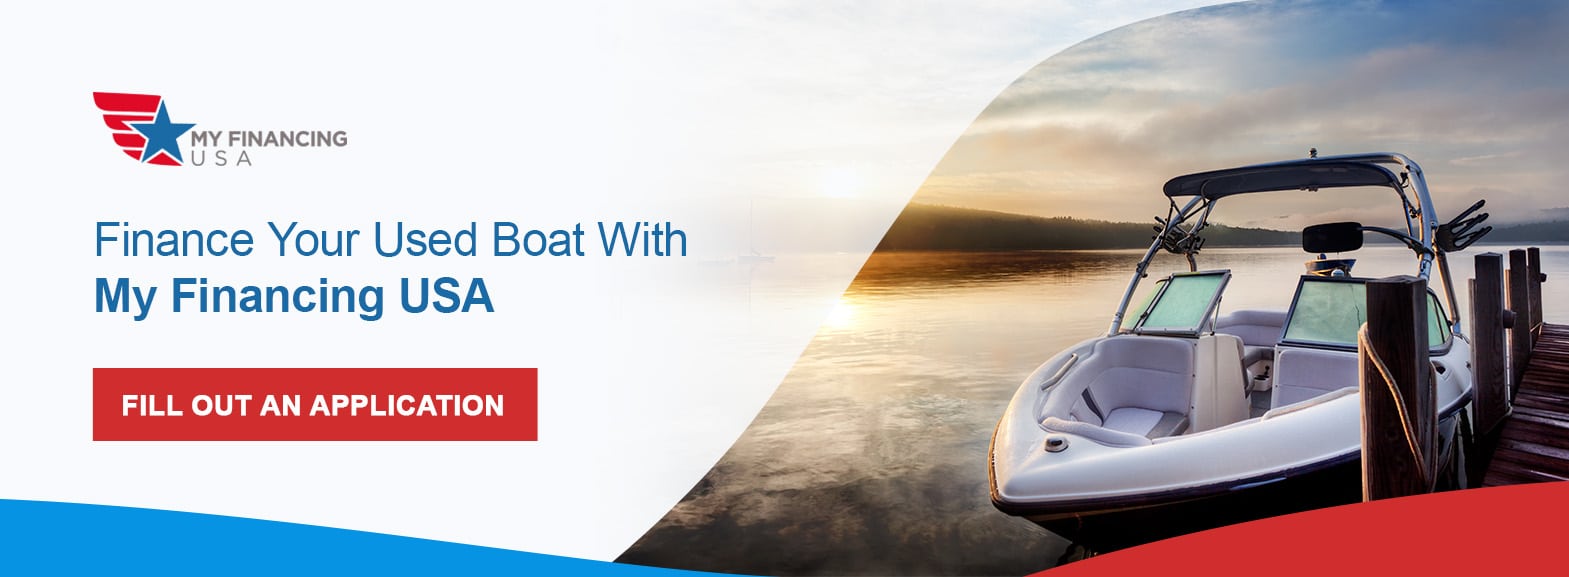 Finance Your Used Boat With My Financing USA